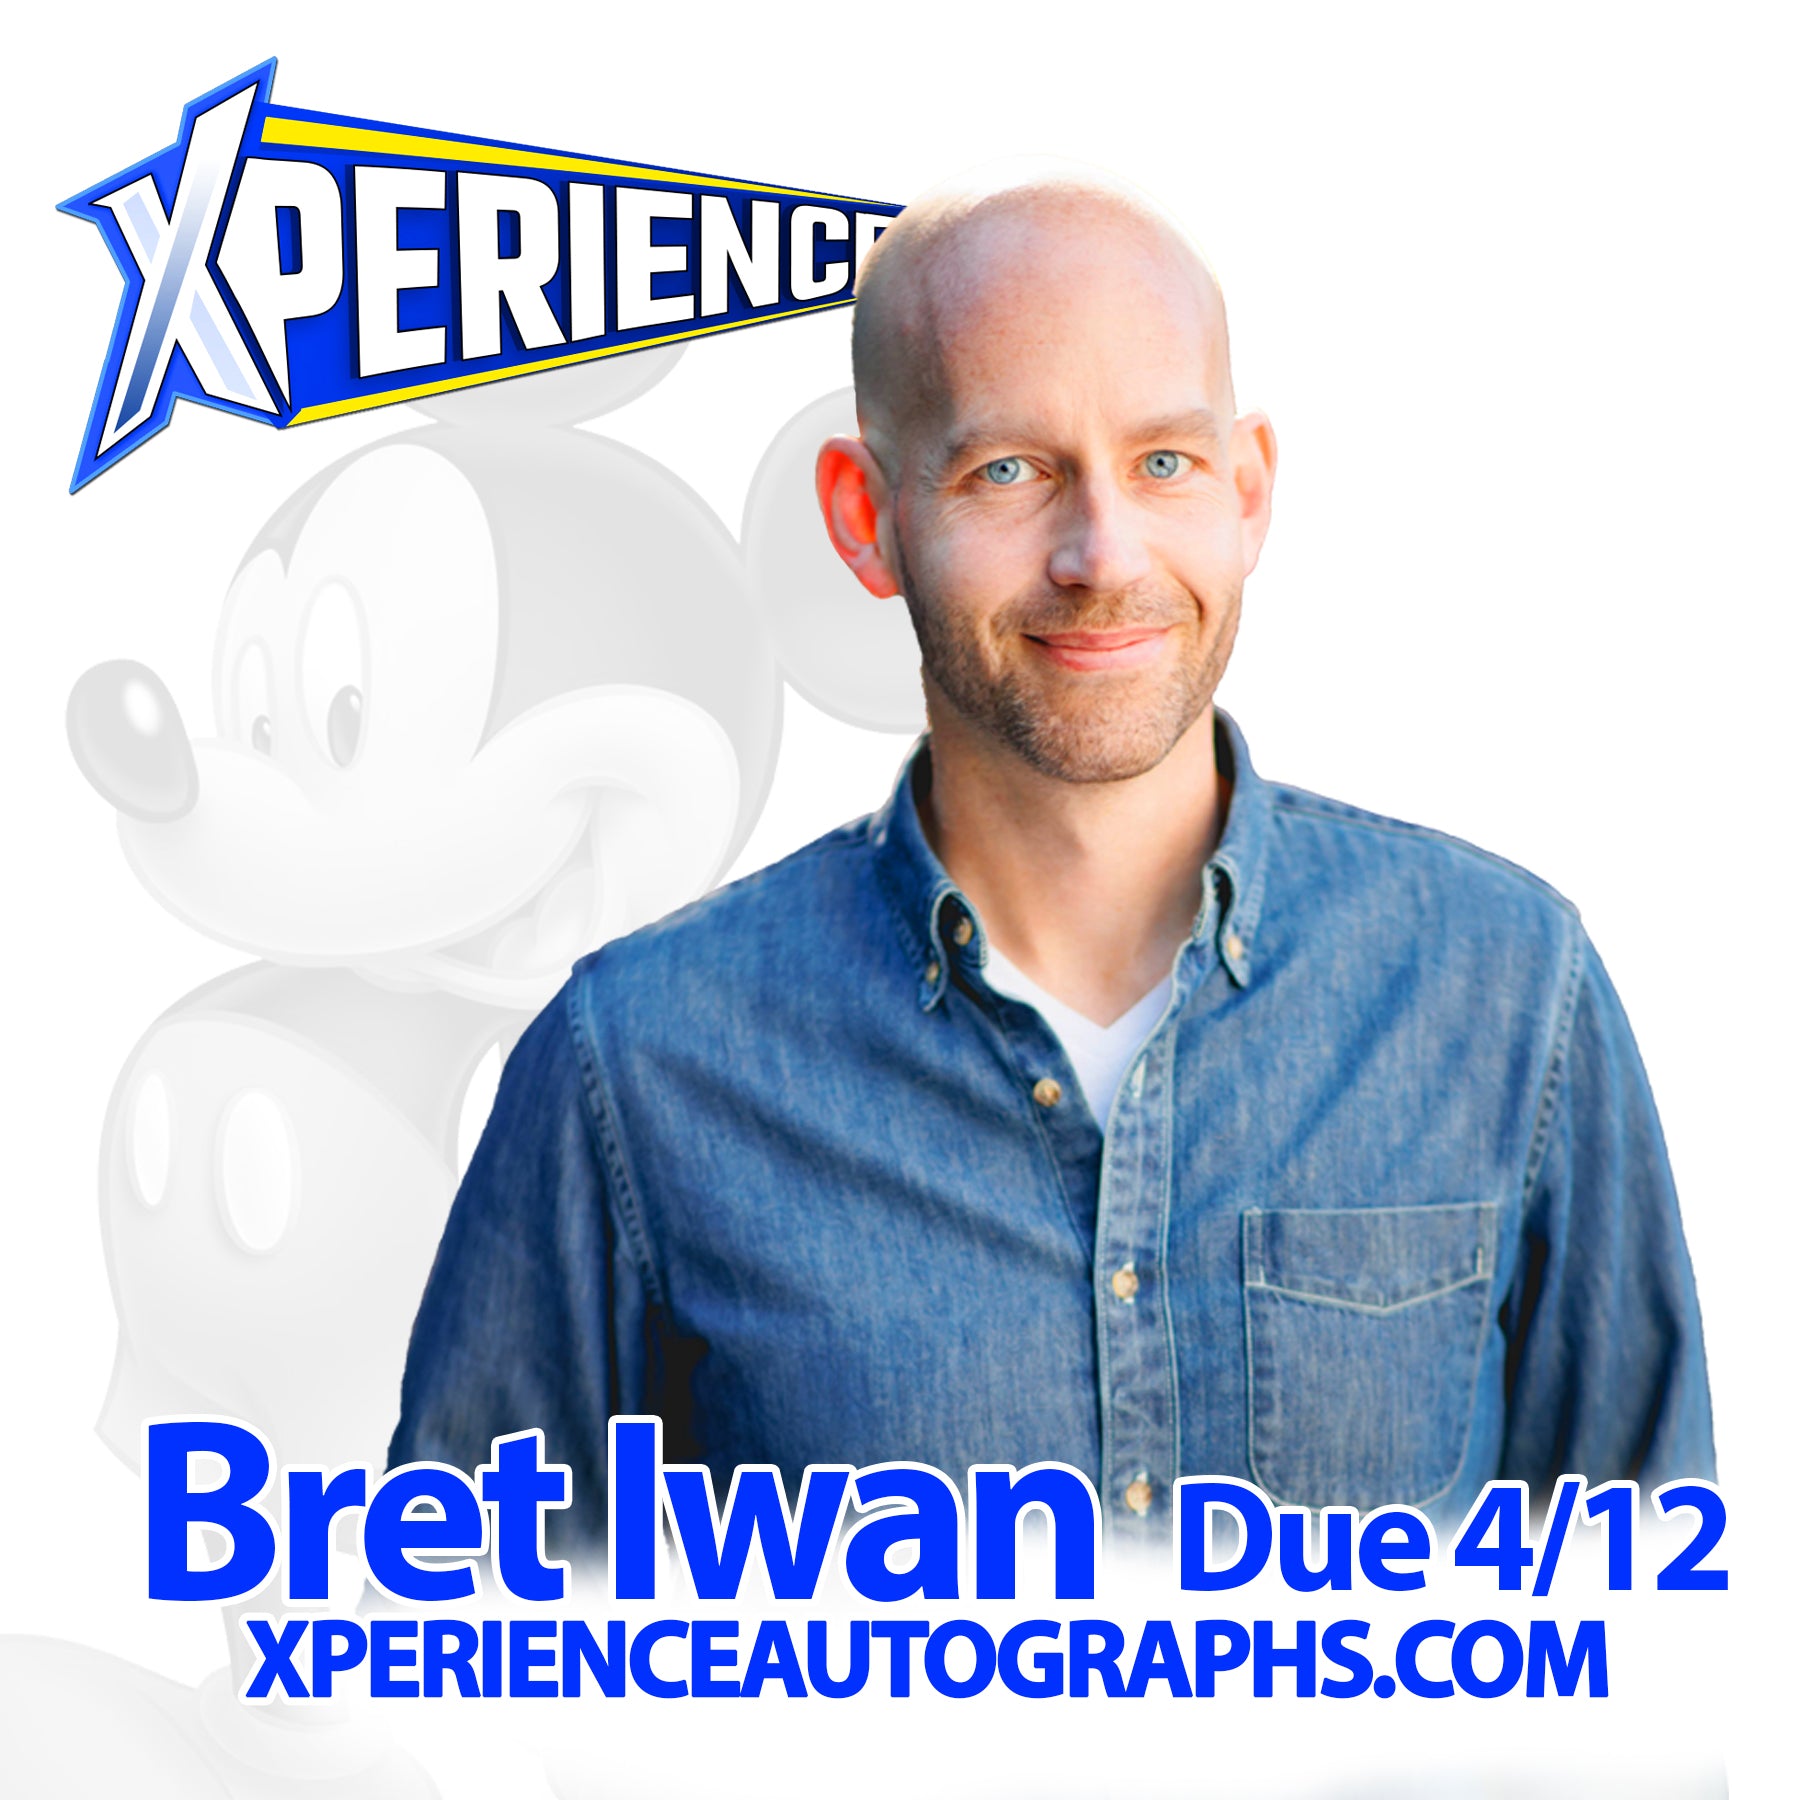 Bret Iwan (Xperience Autographs)